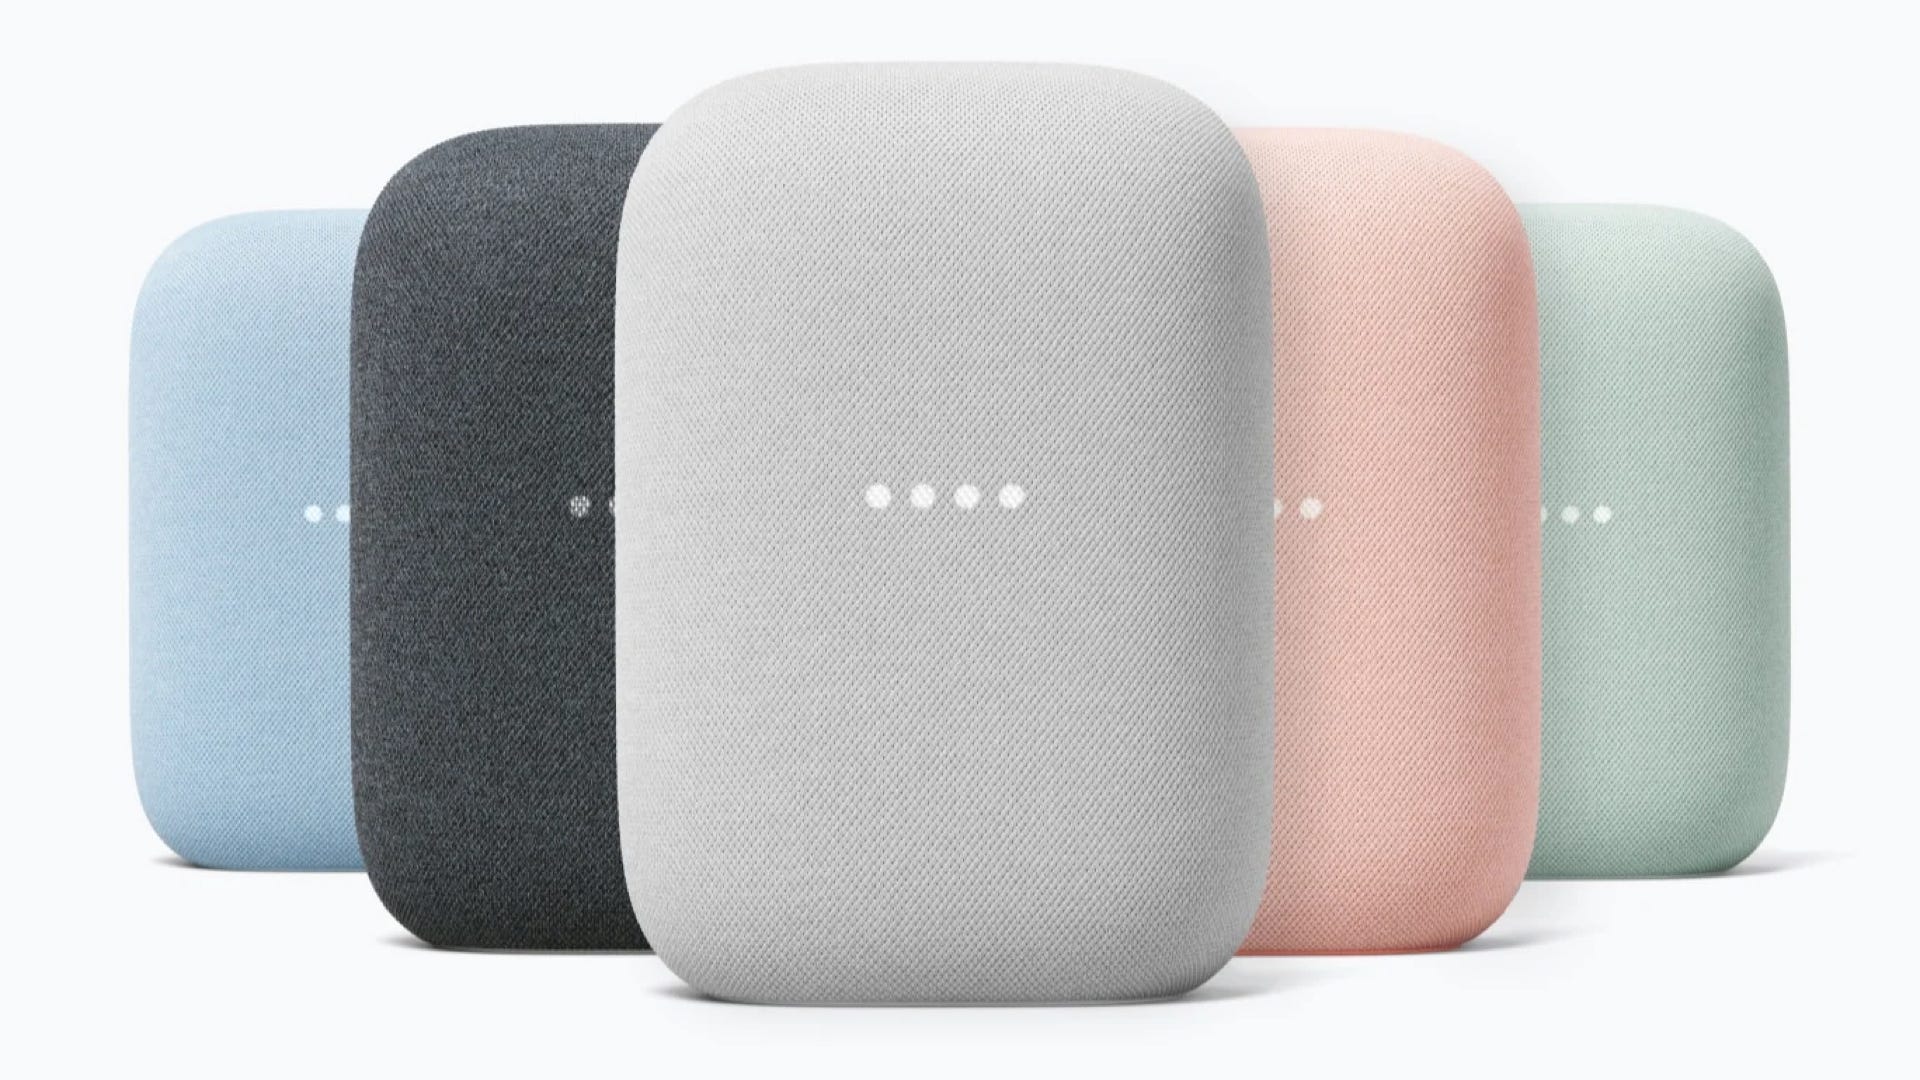 Your Google Home Smart Speakers Are Losing a Big Feature Thanks to Sonos